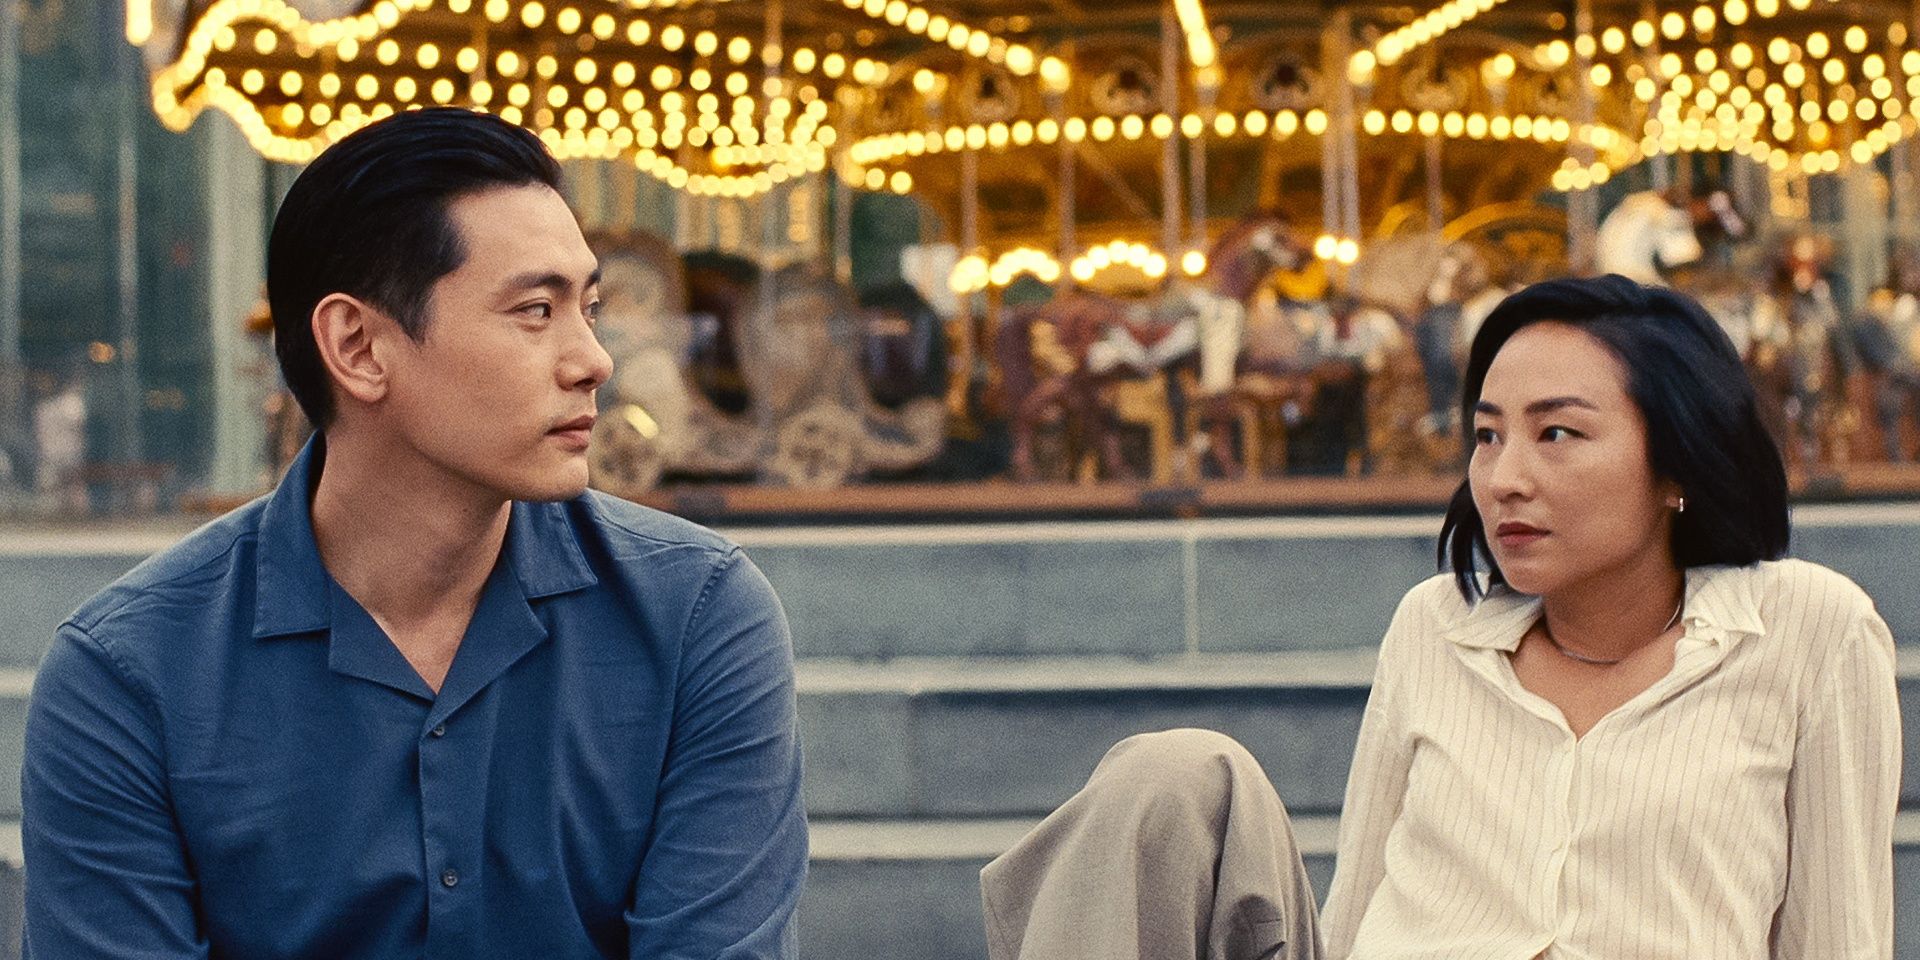 Tee Yoo and Greta Lee sitting in front of a carousel